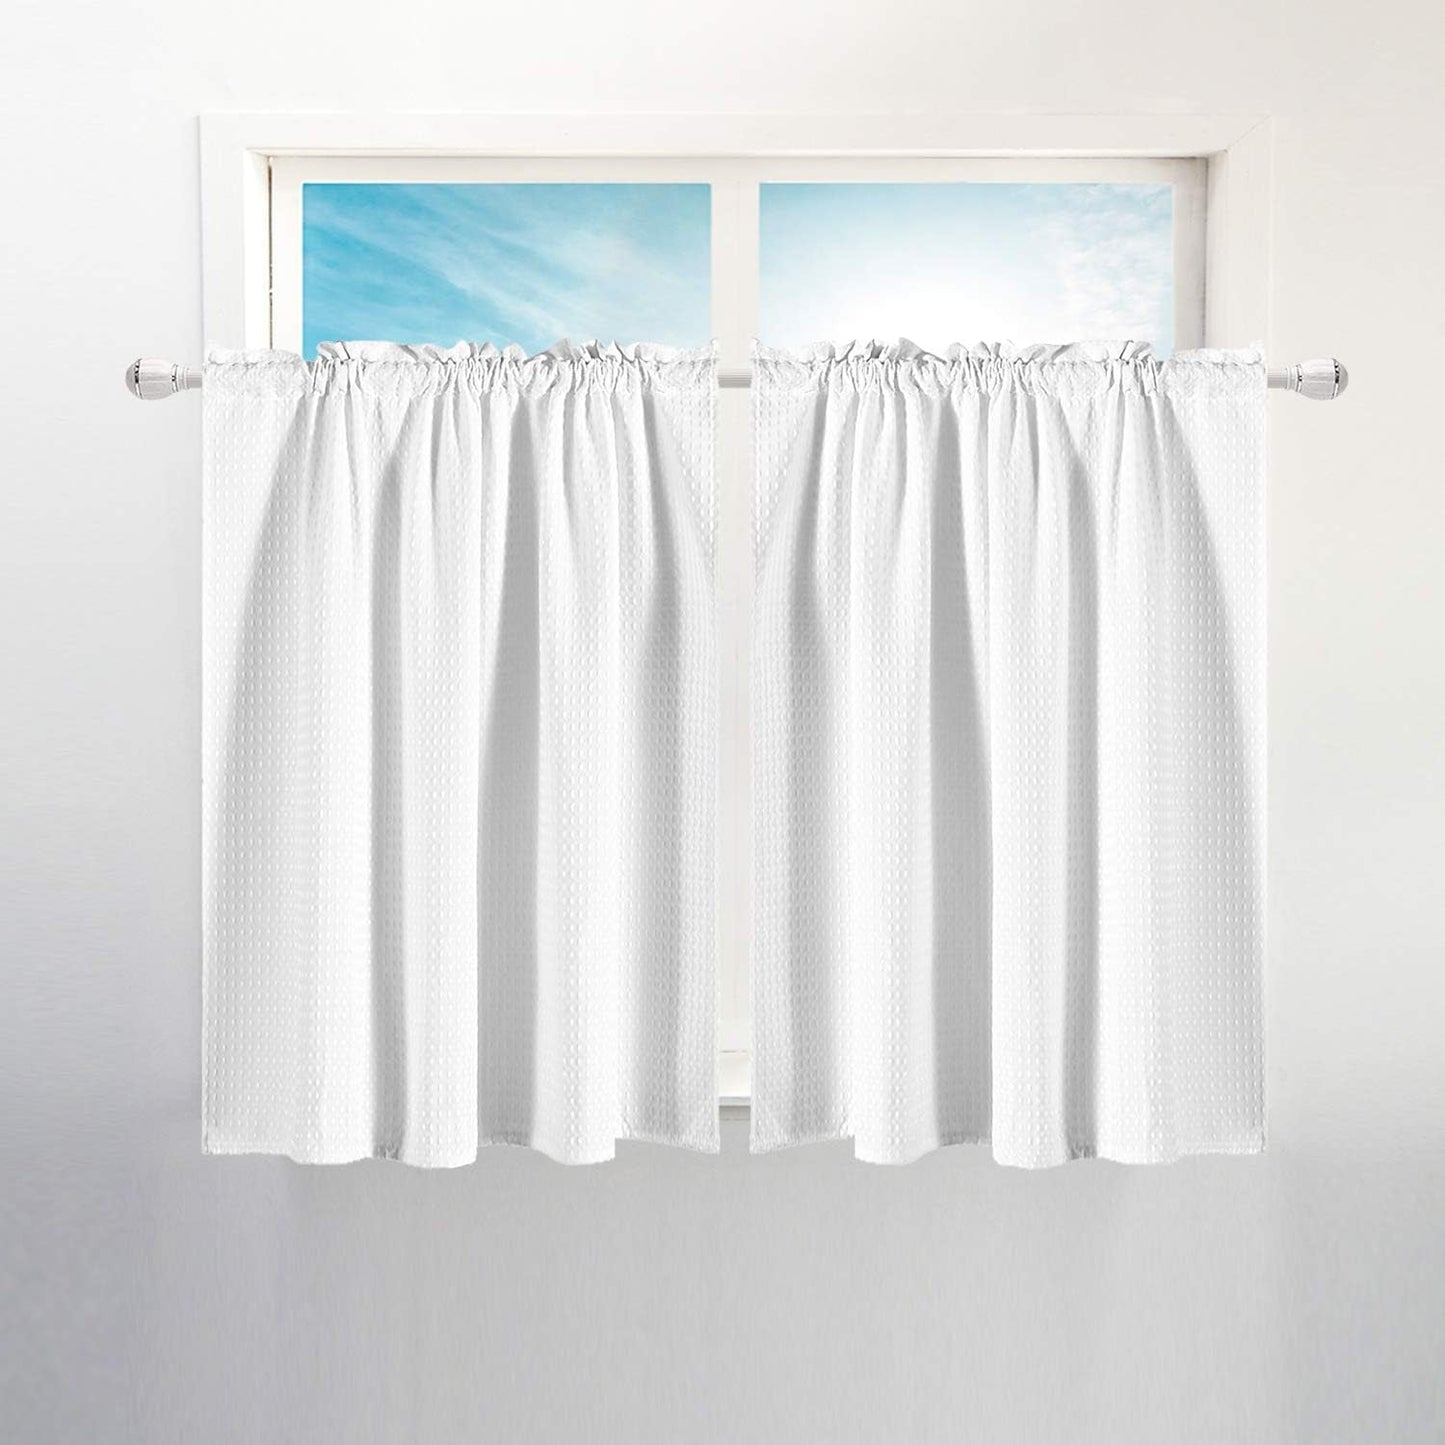 Barossa Design Waffle Weave Half Window Tier Curtains: Small Bathroom Window Curtains Waterproof with 36 Inch Length Short Length for Cafe & Kitchen - White, 36"X36" for Each Panel, Set of 2